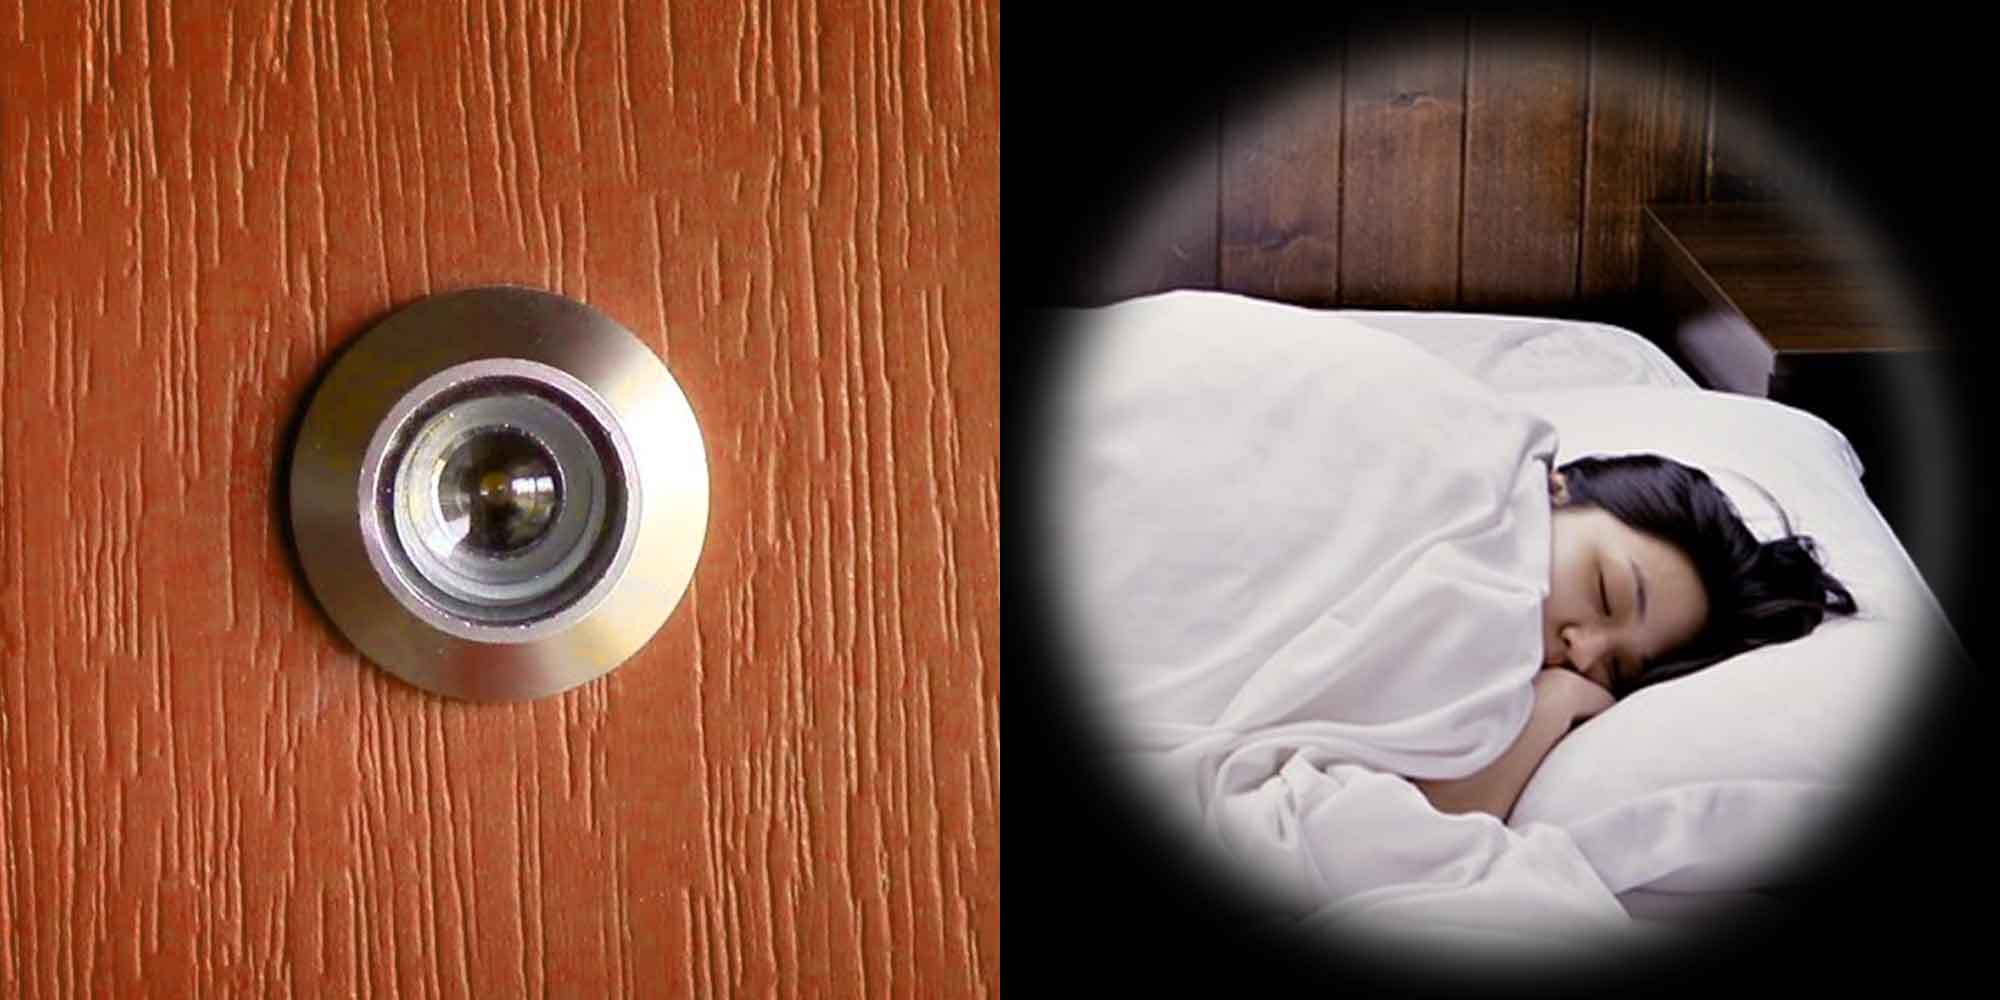 This Creepy Reverse Peephole Viewer Lets You Look Inside A Room